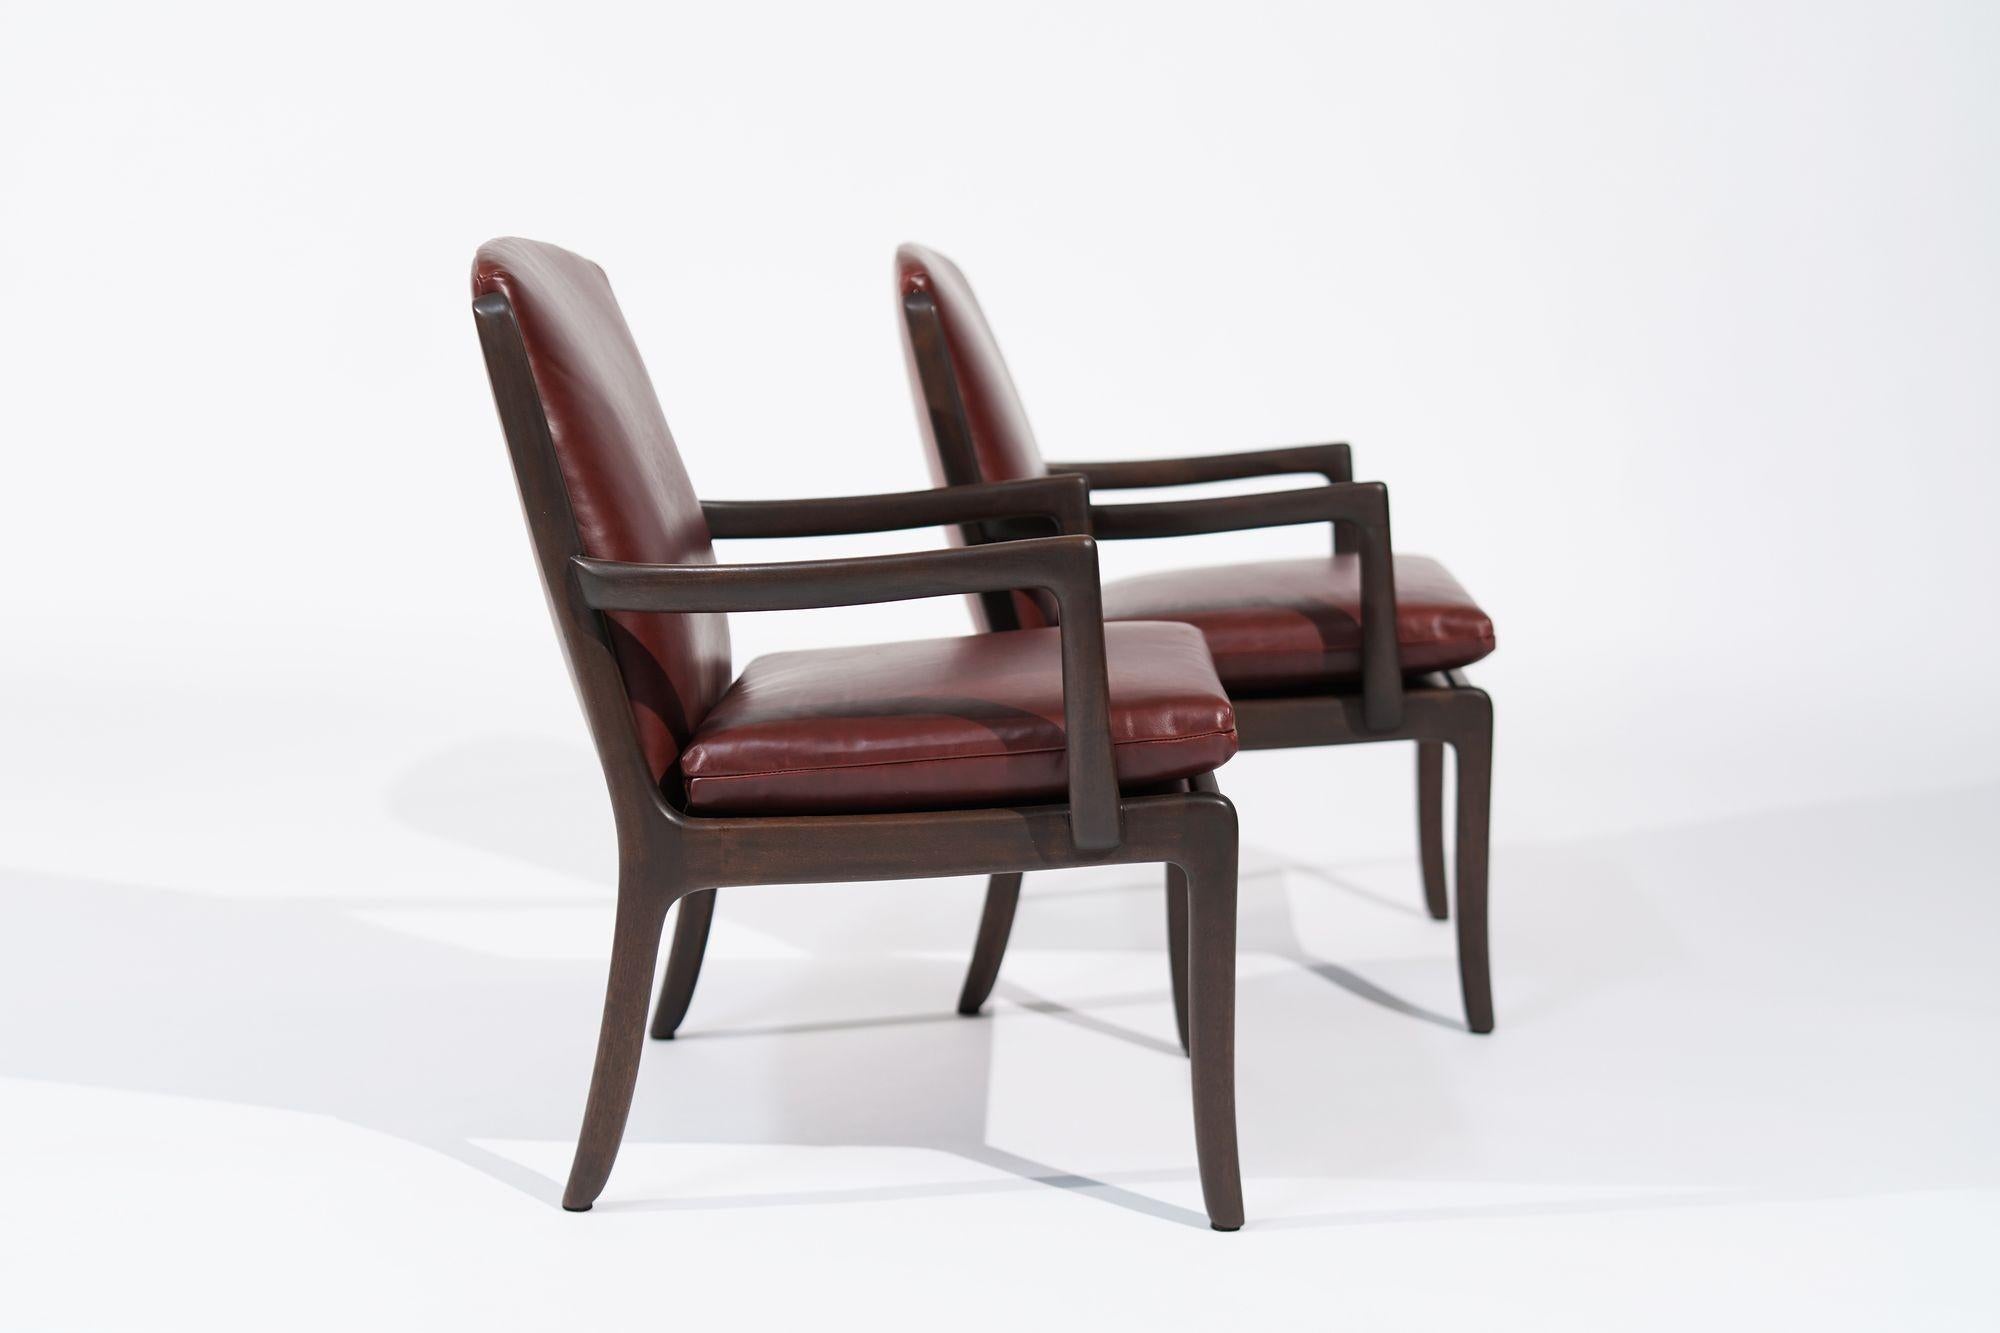 Set of Lounge Chairs by Ole Wanscher in Sangria Leather, Denmark, C. 1960s For Sale 1